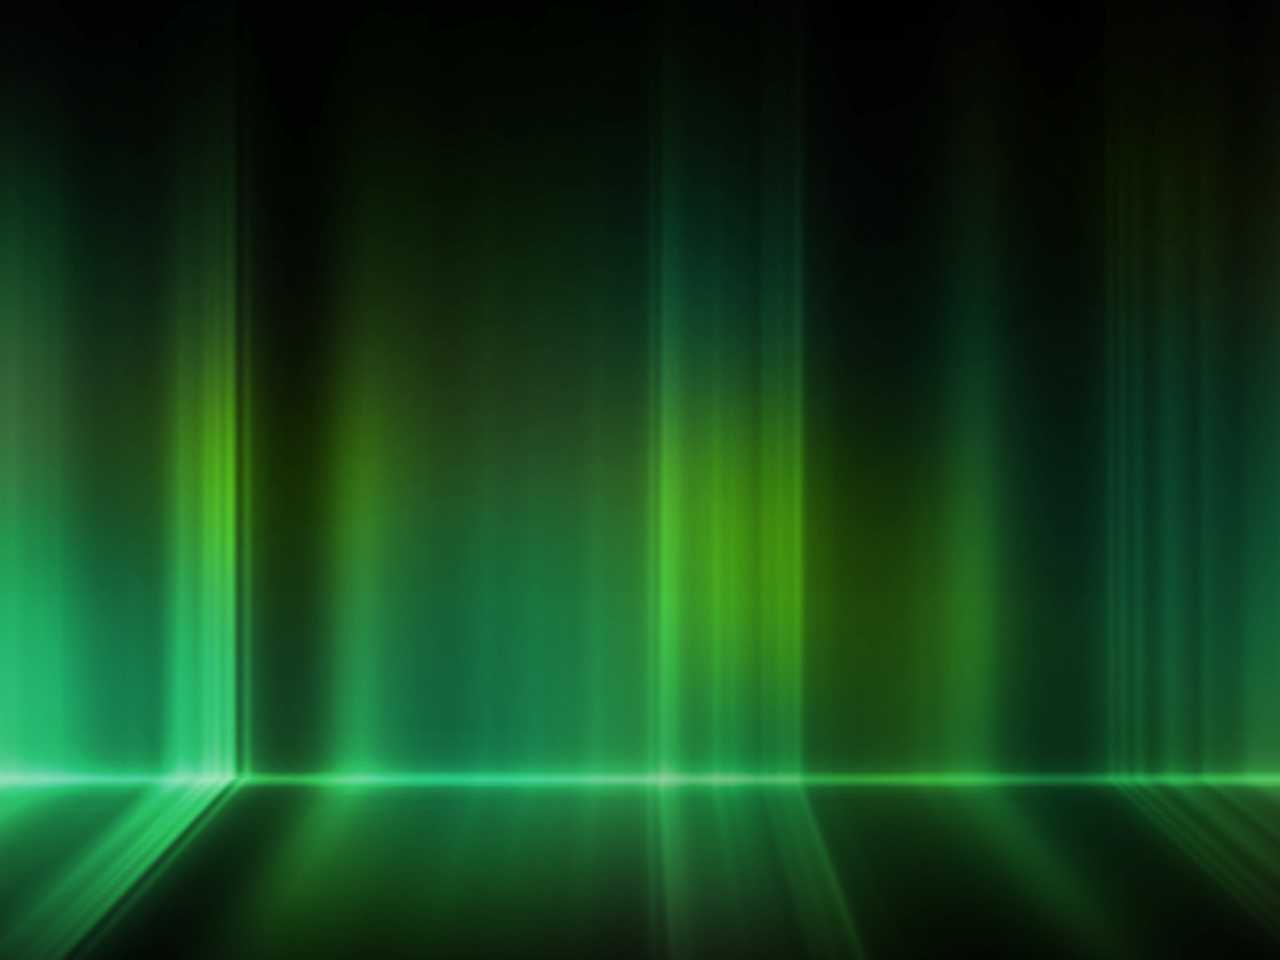 Collection of Black Green Hd Wallpaper on HDWallpapers 